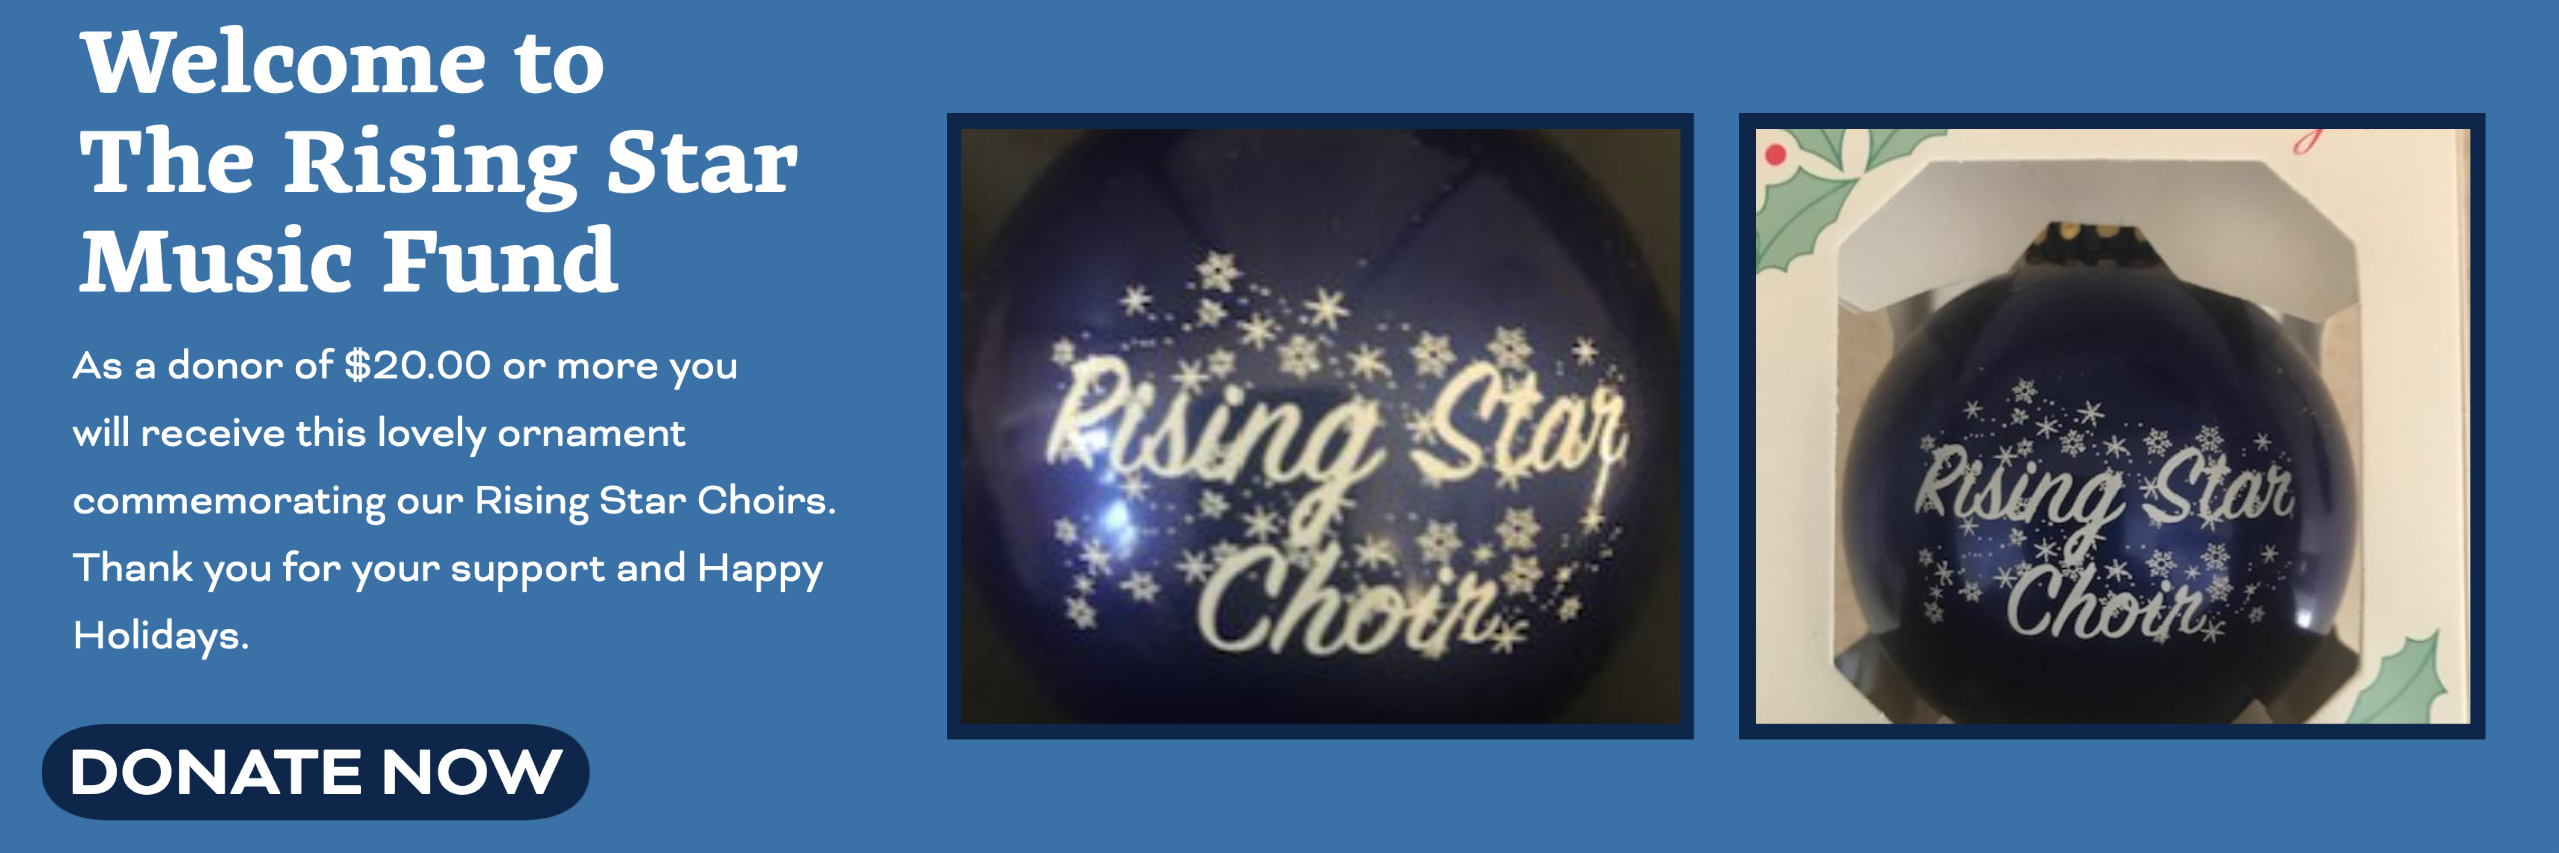 Welcome to Rising Star Music Fund